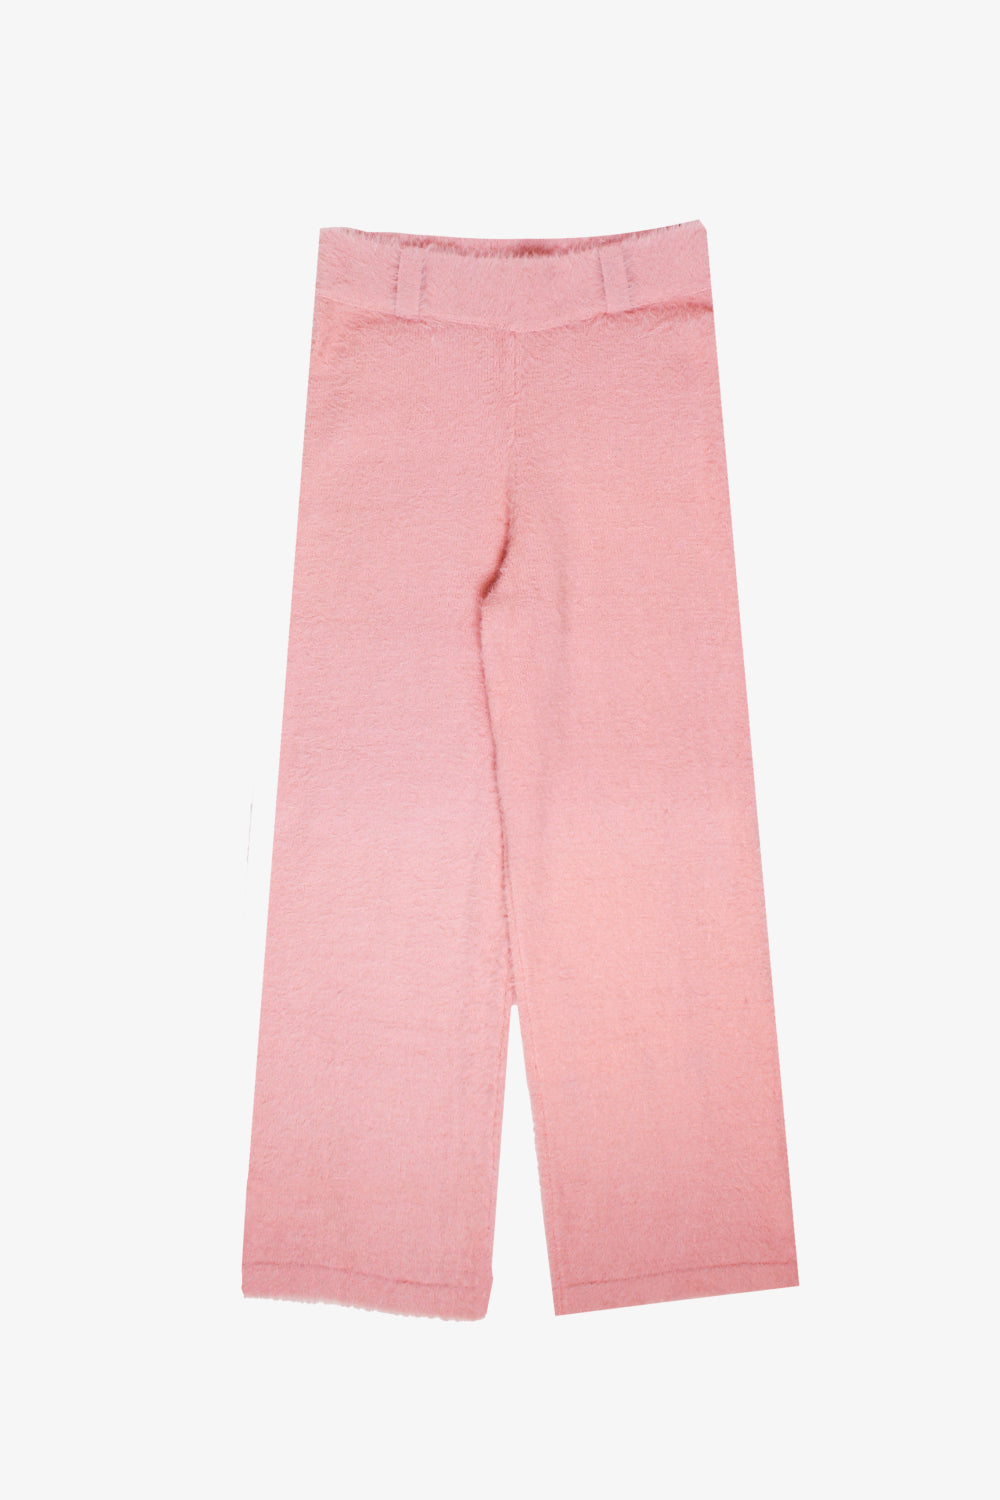 Baby Pink Mohair Pants